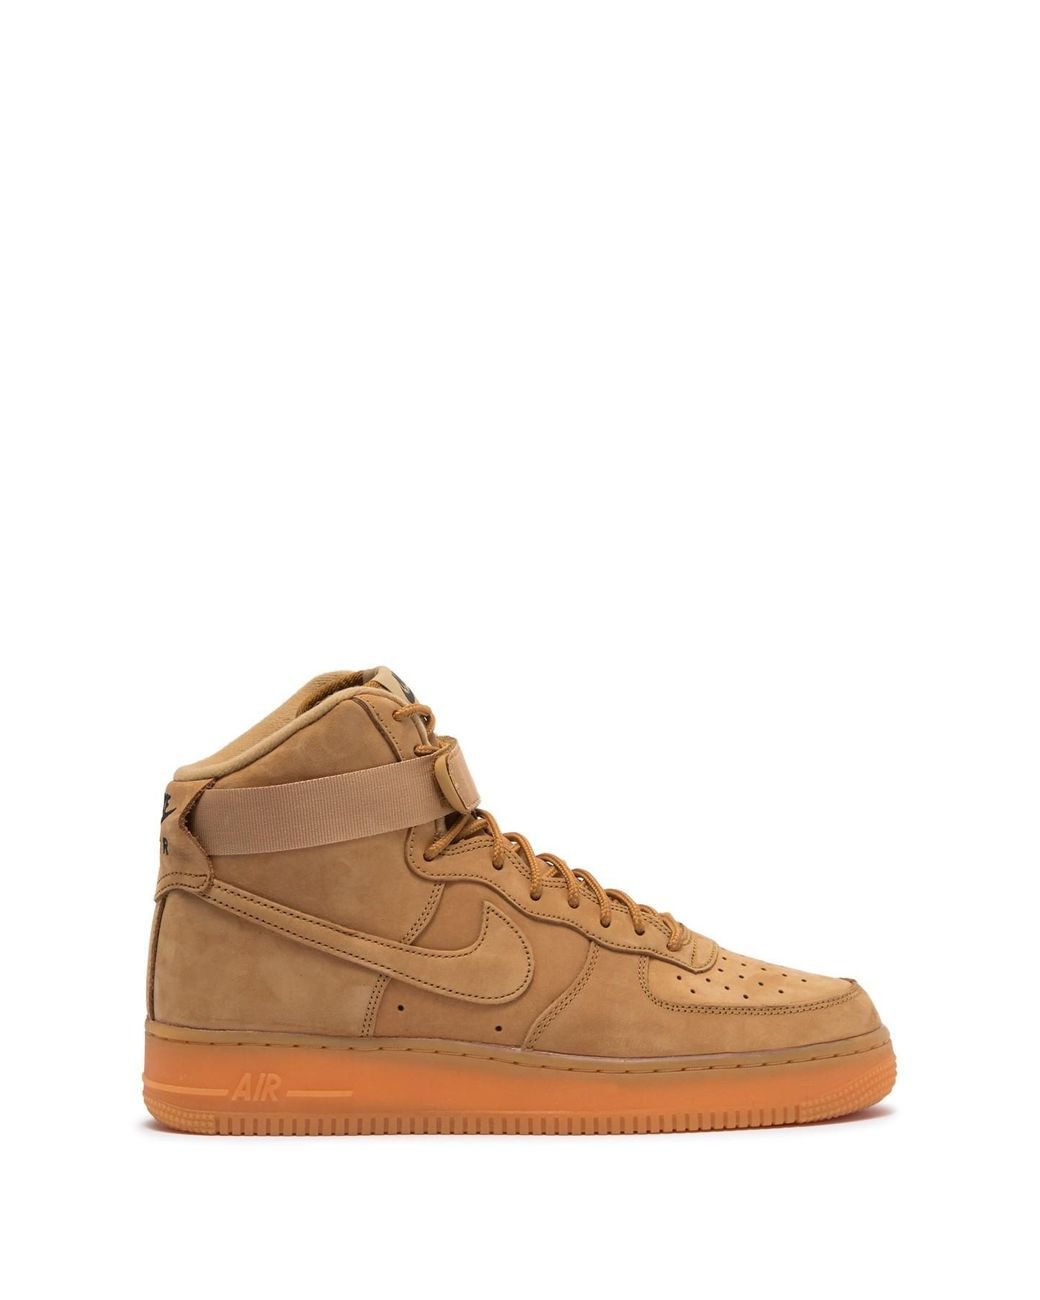 Nike Lace Air Force 1 High in Camel (Natural) for Men | Lyst